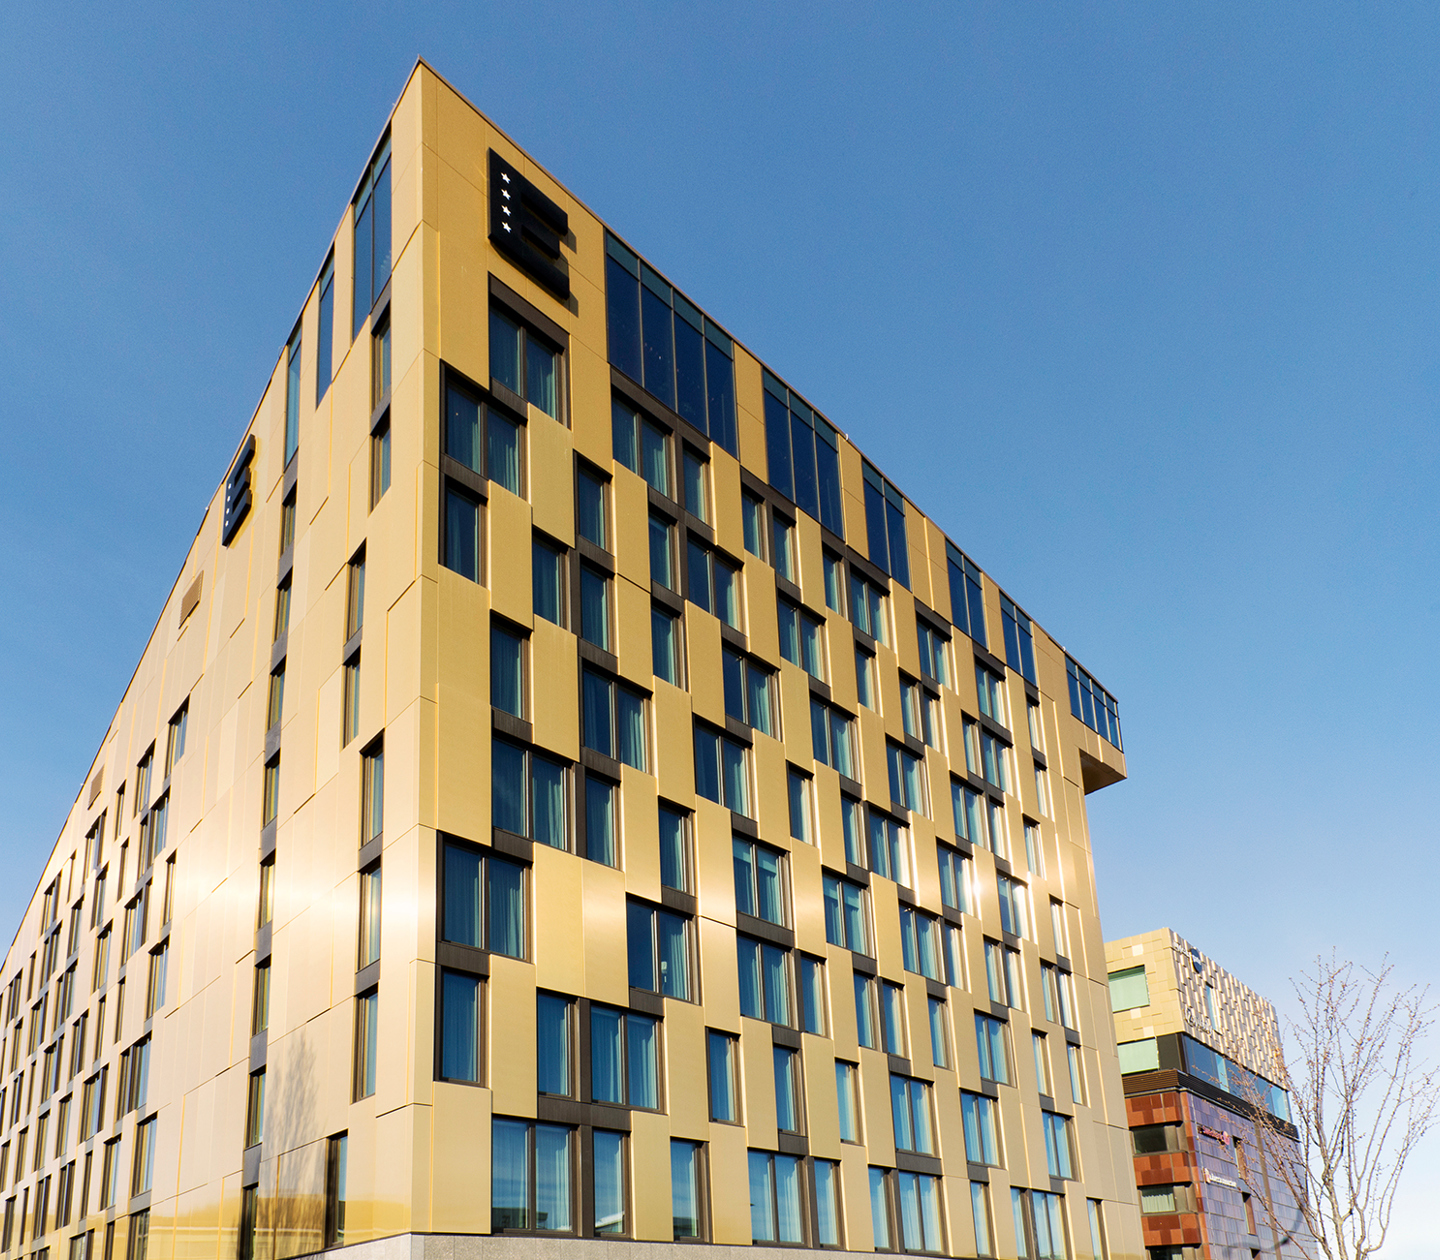 An architect-designed building with a golden facade